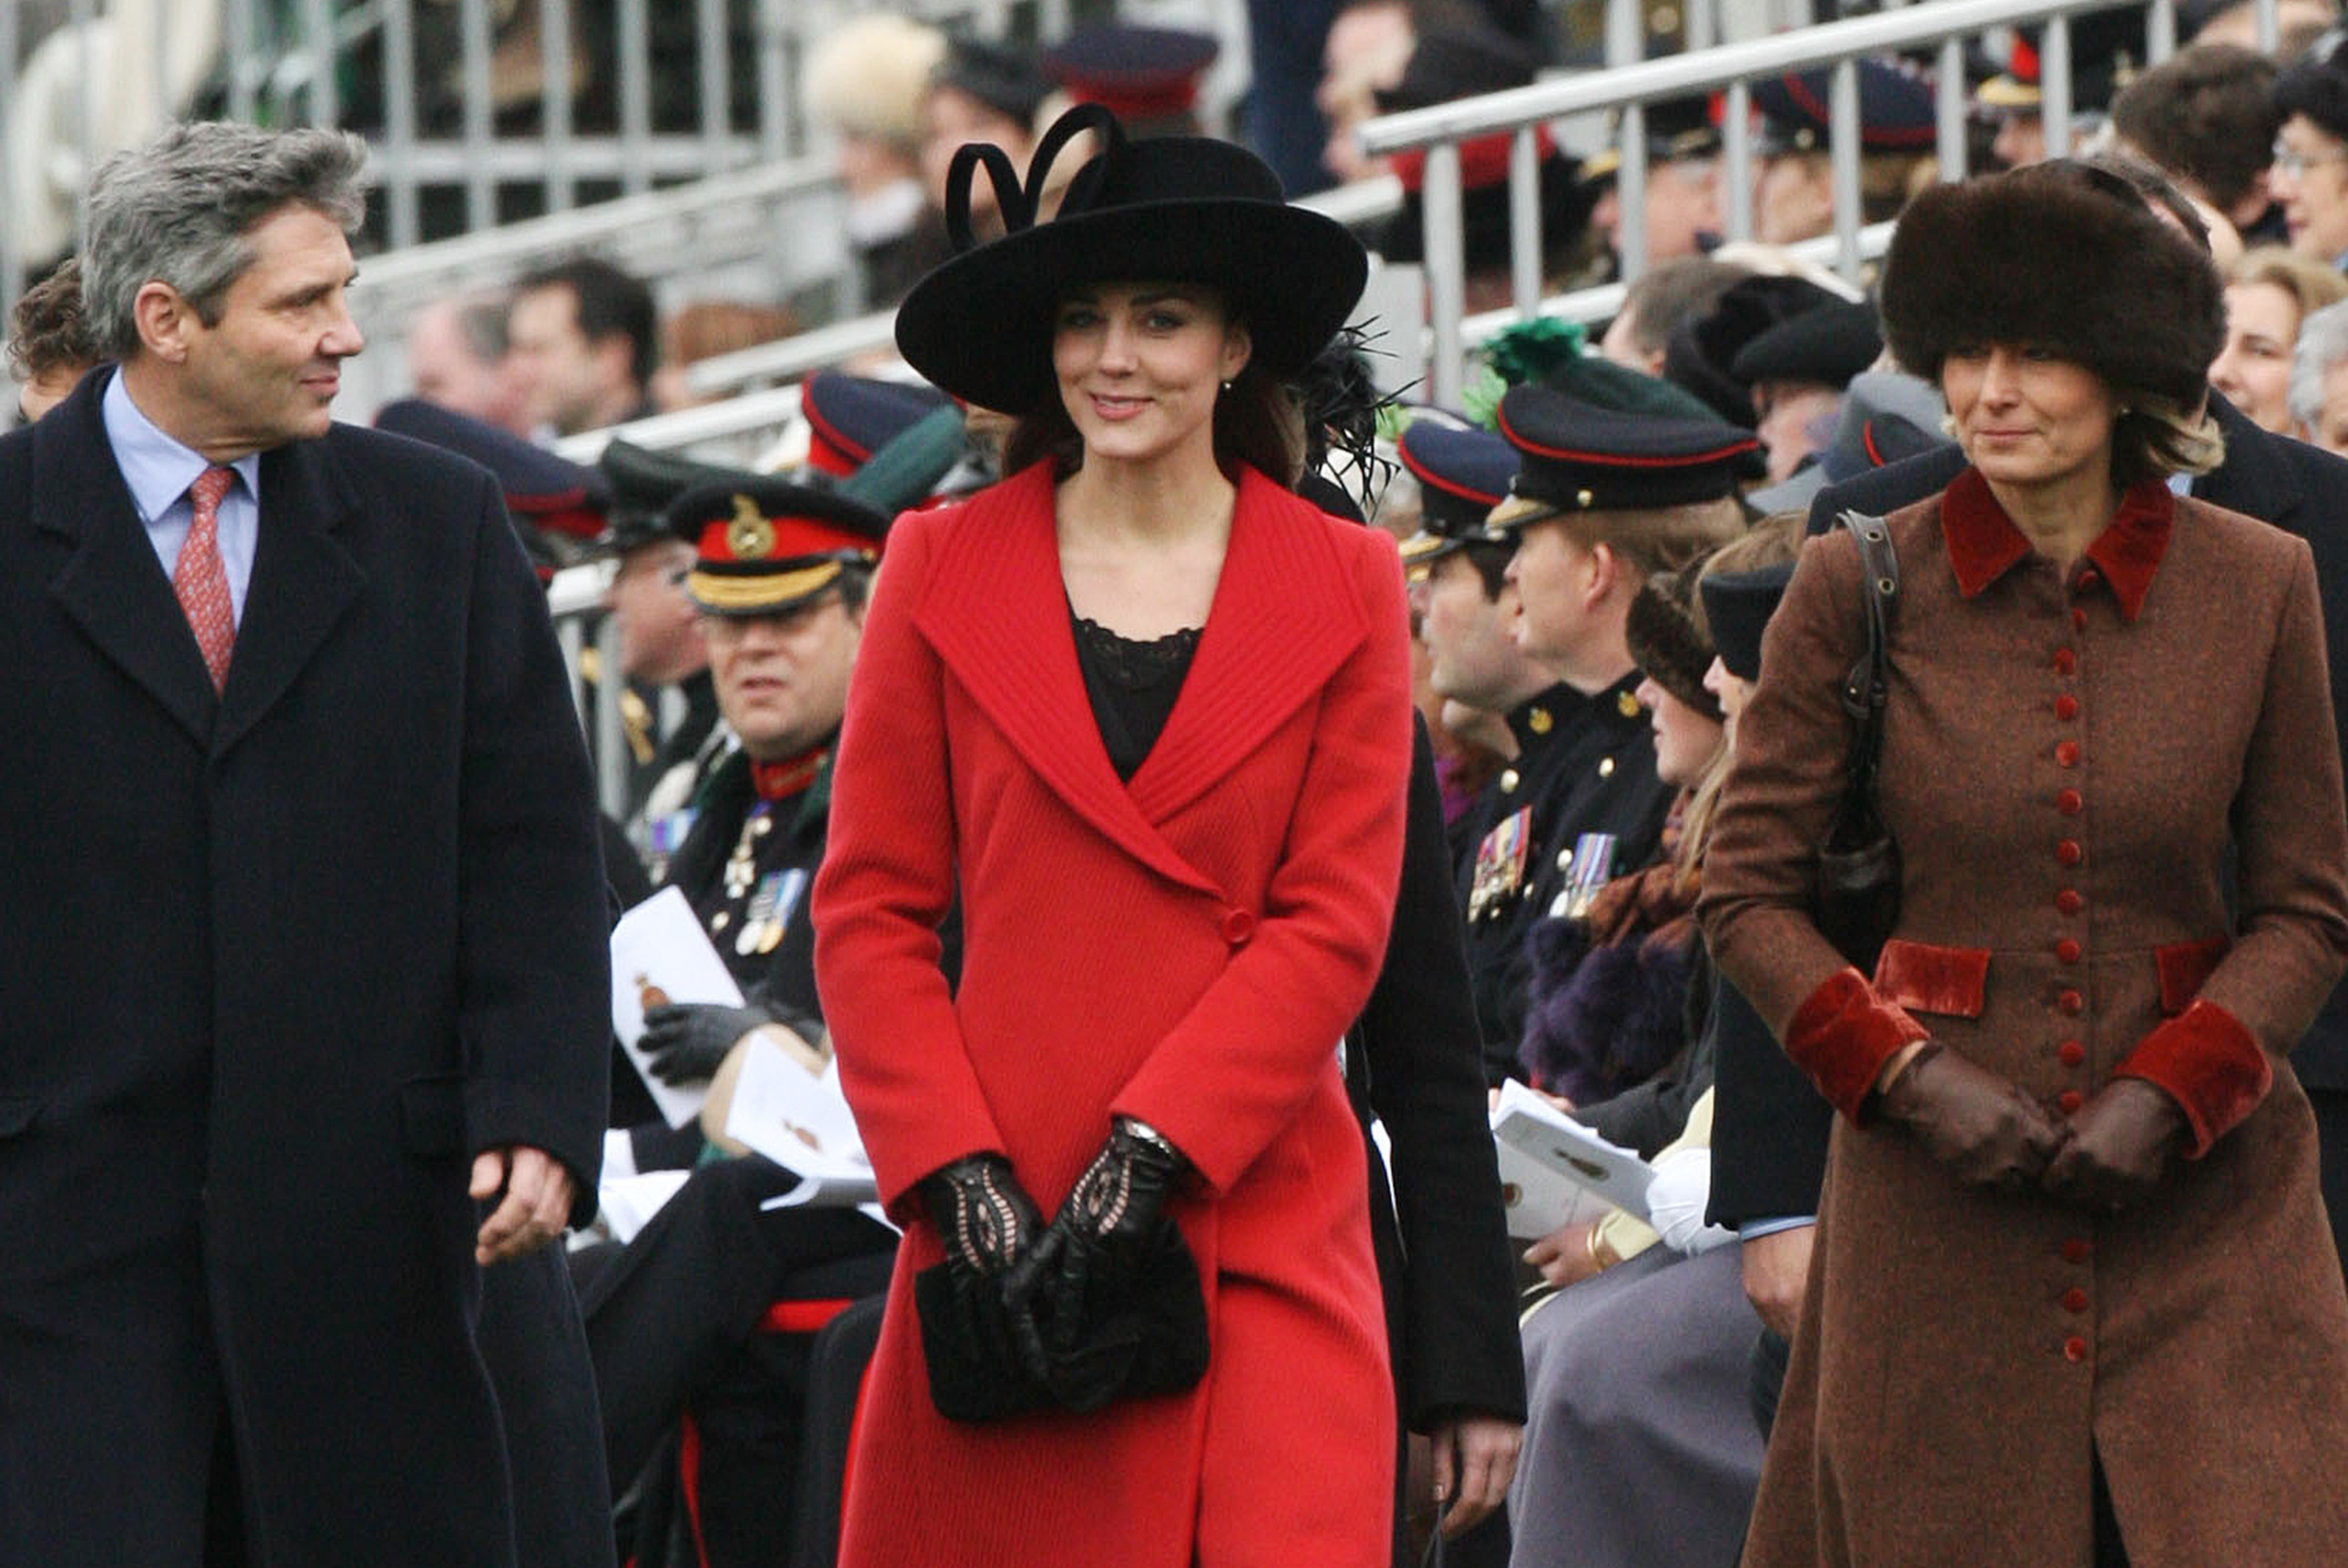 Michael Middleton, Kate Middleton and Carole Middleton at the Sovereign's Parade at Sandhurst Military Academy on December 15, 2006 | Source: Getty Images